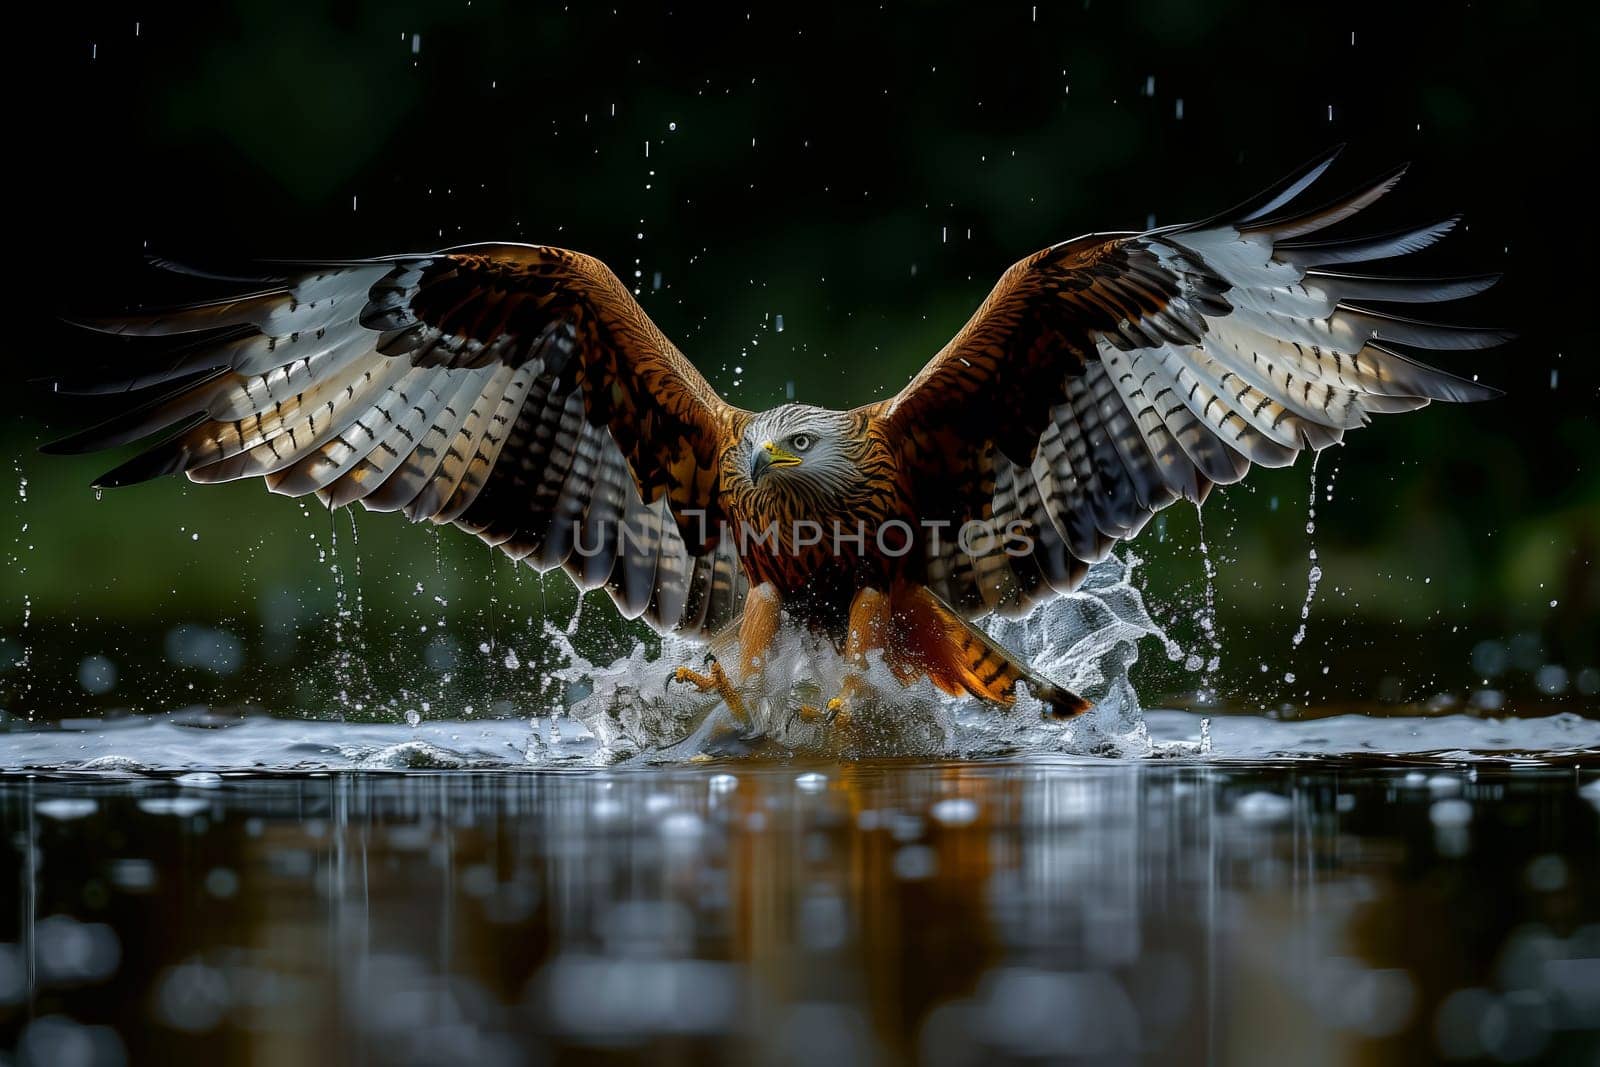 Accipitridae bird soaring over water with wings extended by richwolf